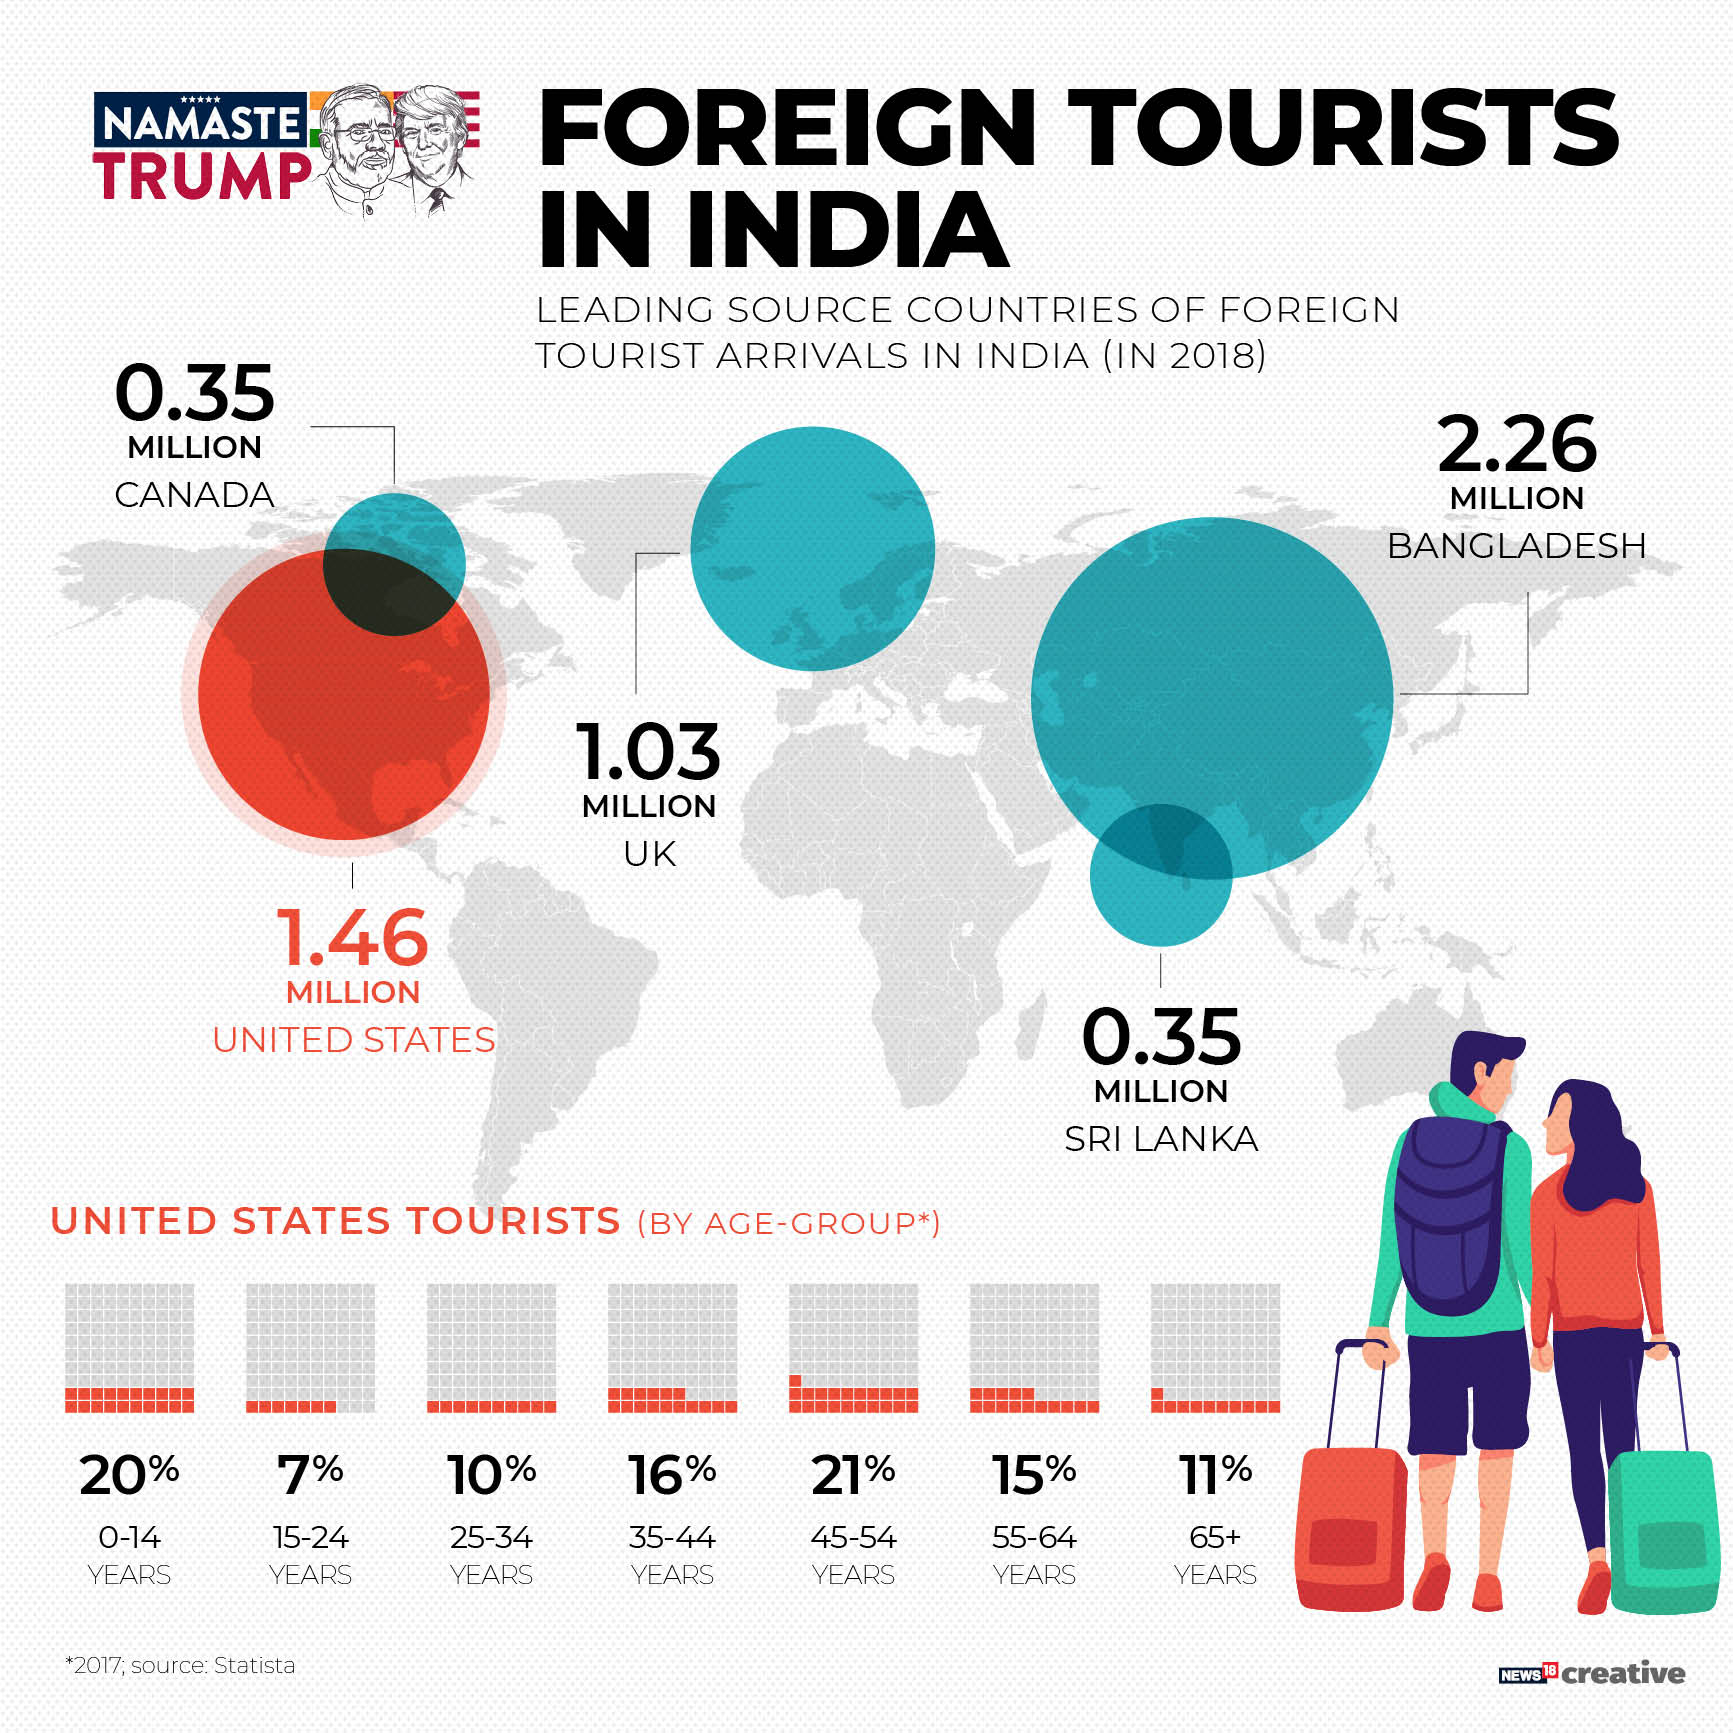 foreign tourist arrivals in india 2022 state wise